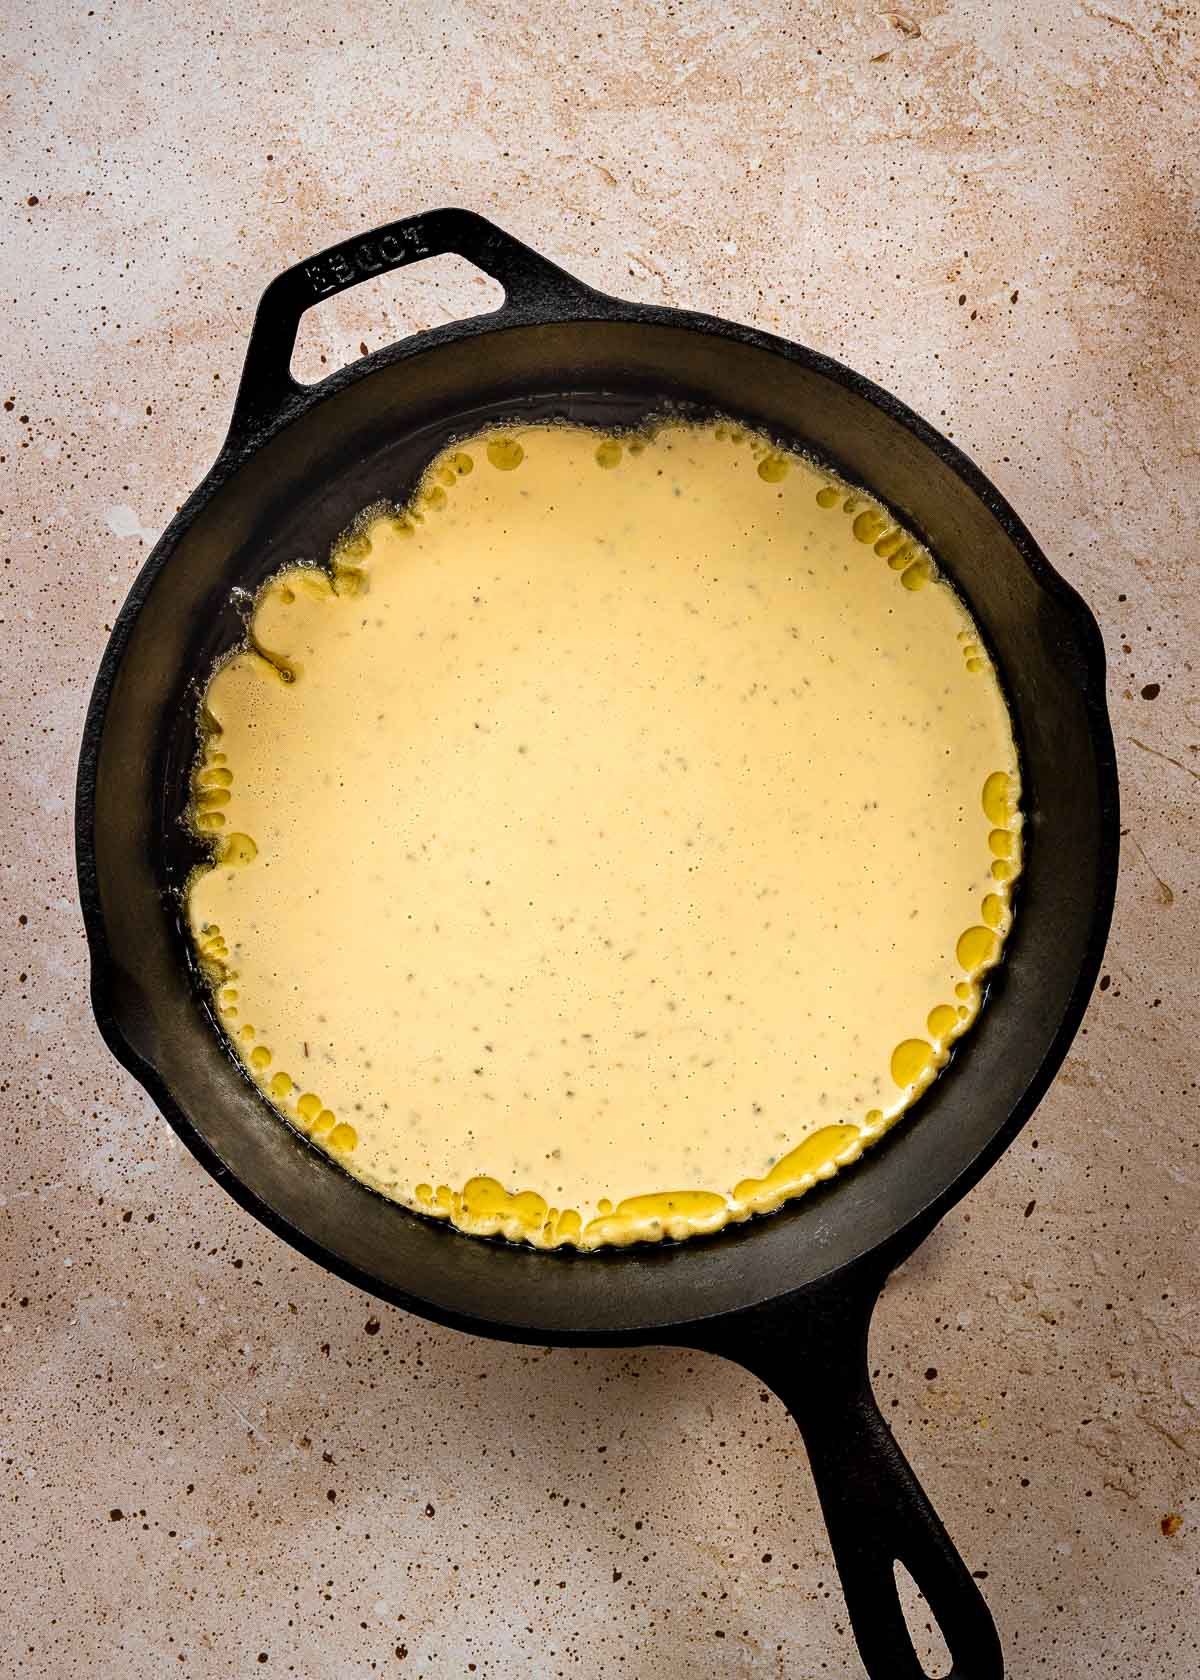 Uncooked chickpea pizza batter in hot cast iron pan.